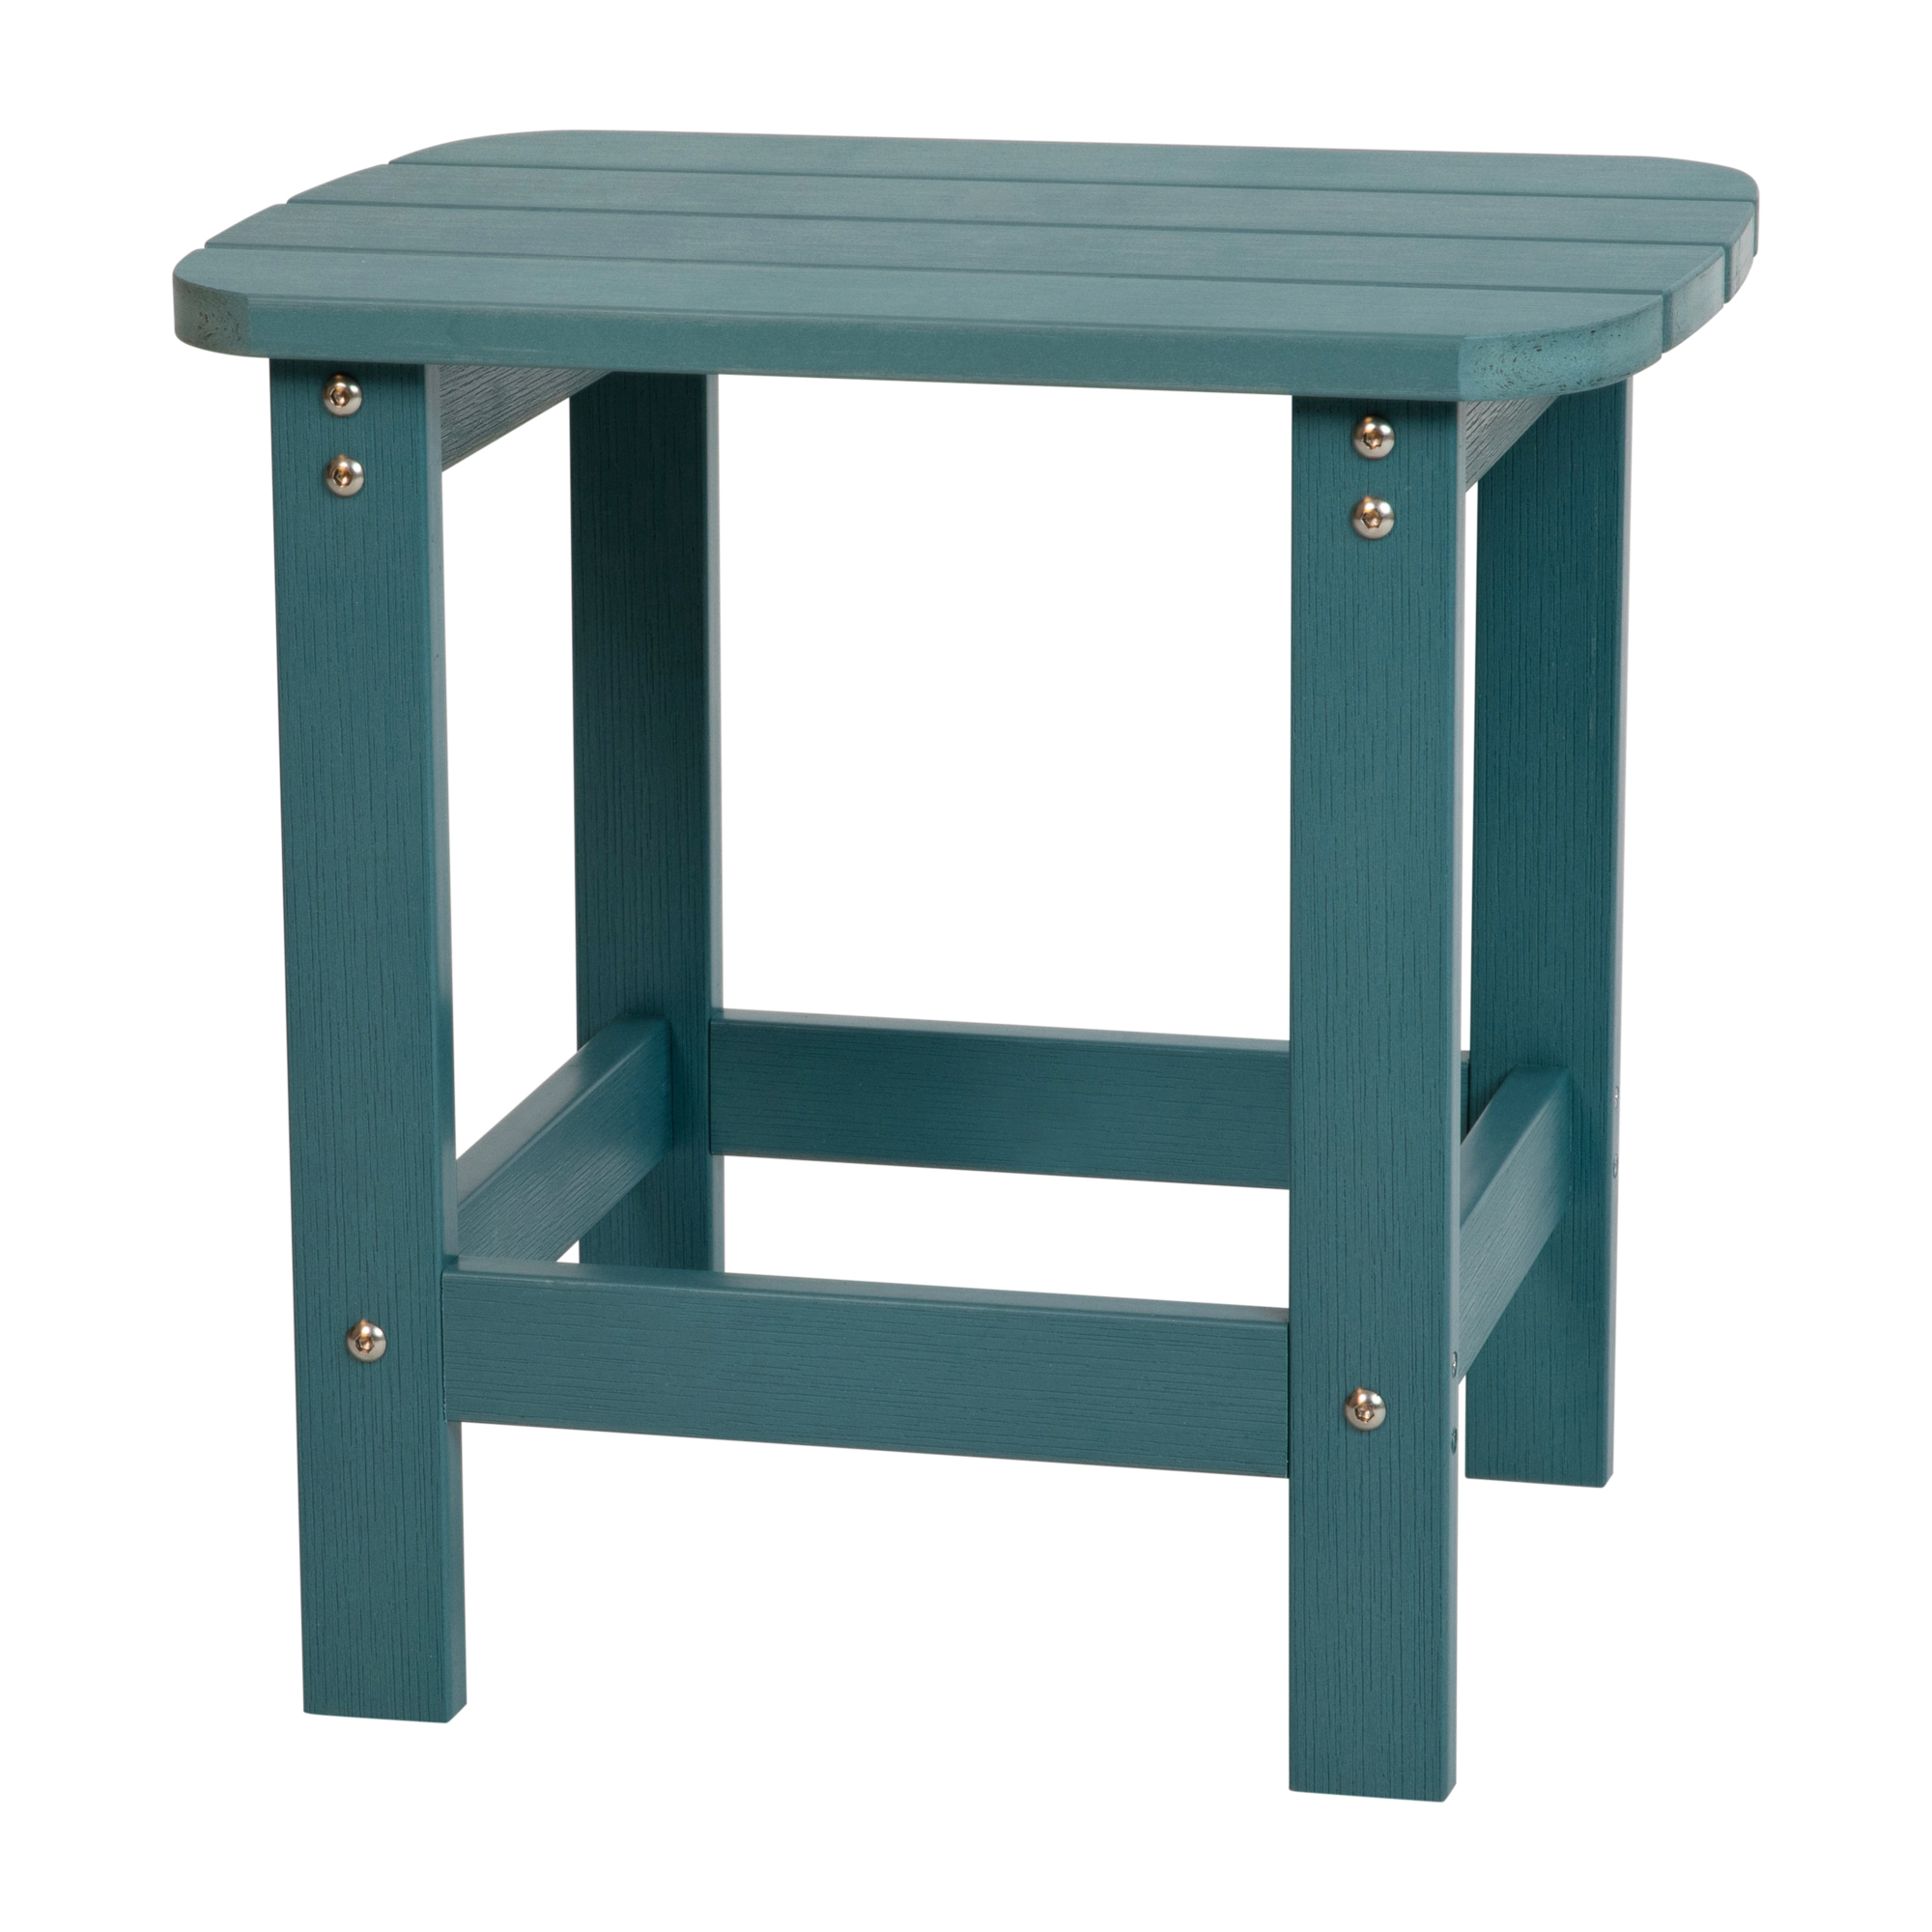 Flash Furniture, Sea Foam All-Weather Adirondack Side Table, Table Shape Rectangle, Primary Color Blue, Height 18.25 in, Model JJT14001SFM